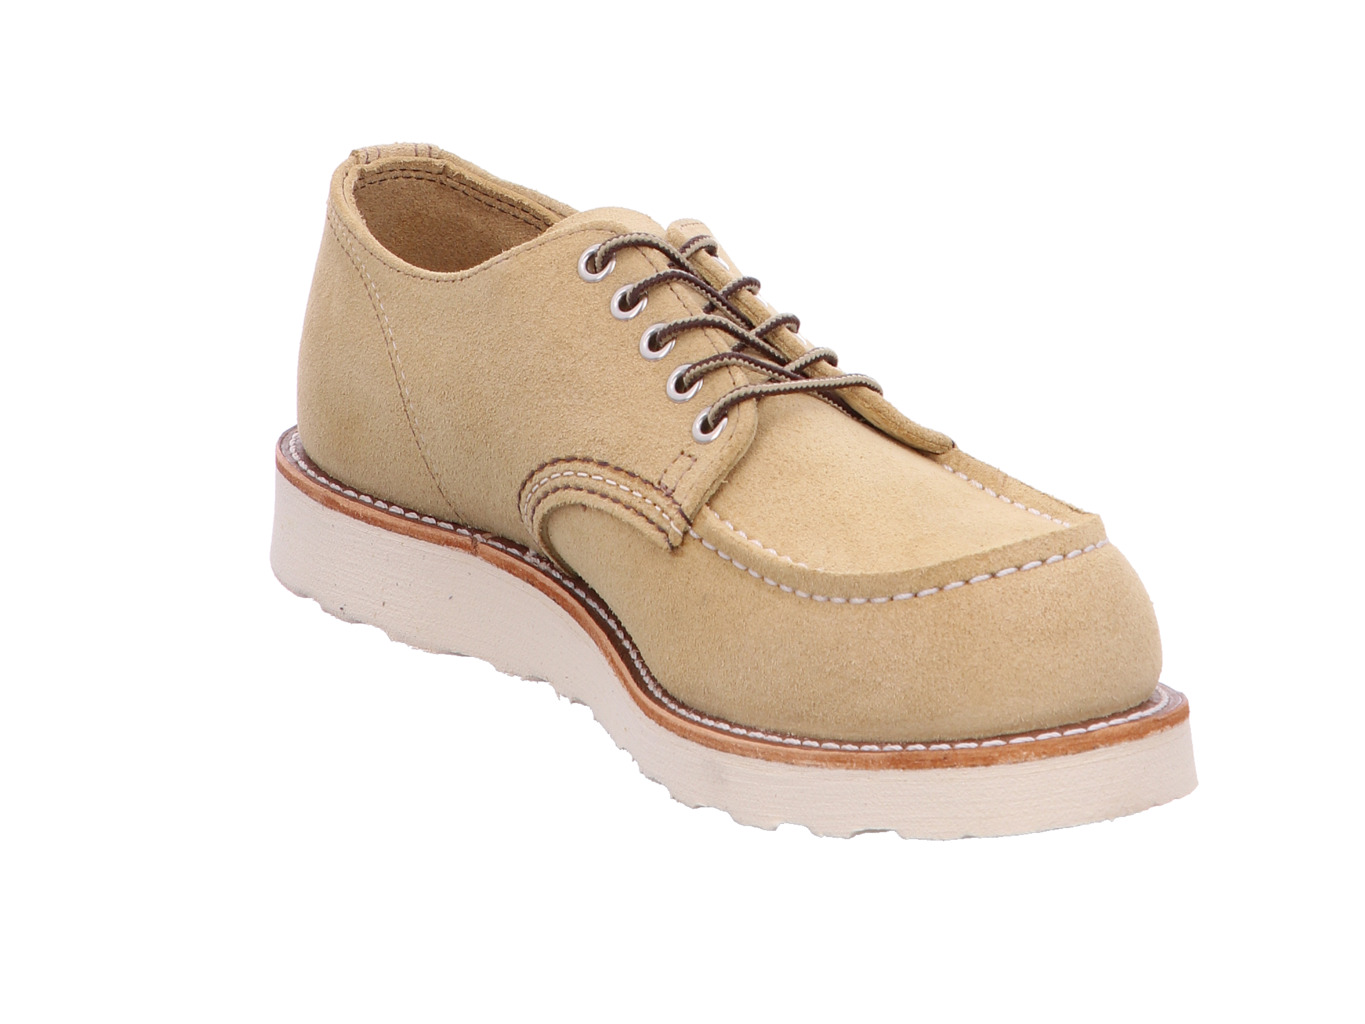 red_wing_moc_oxford_08079_6181